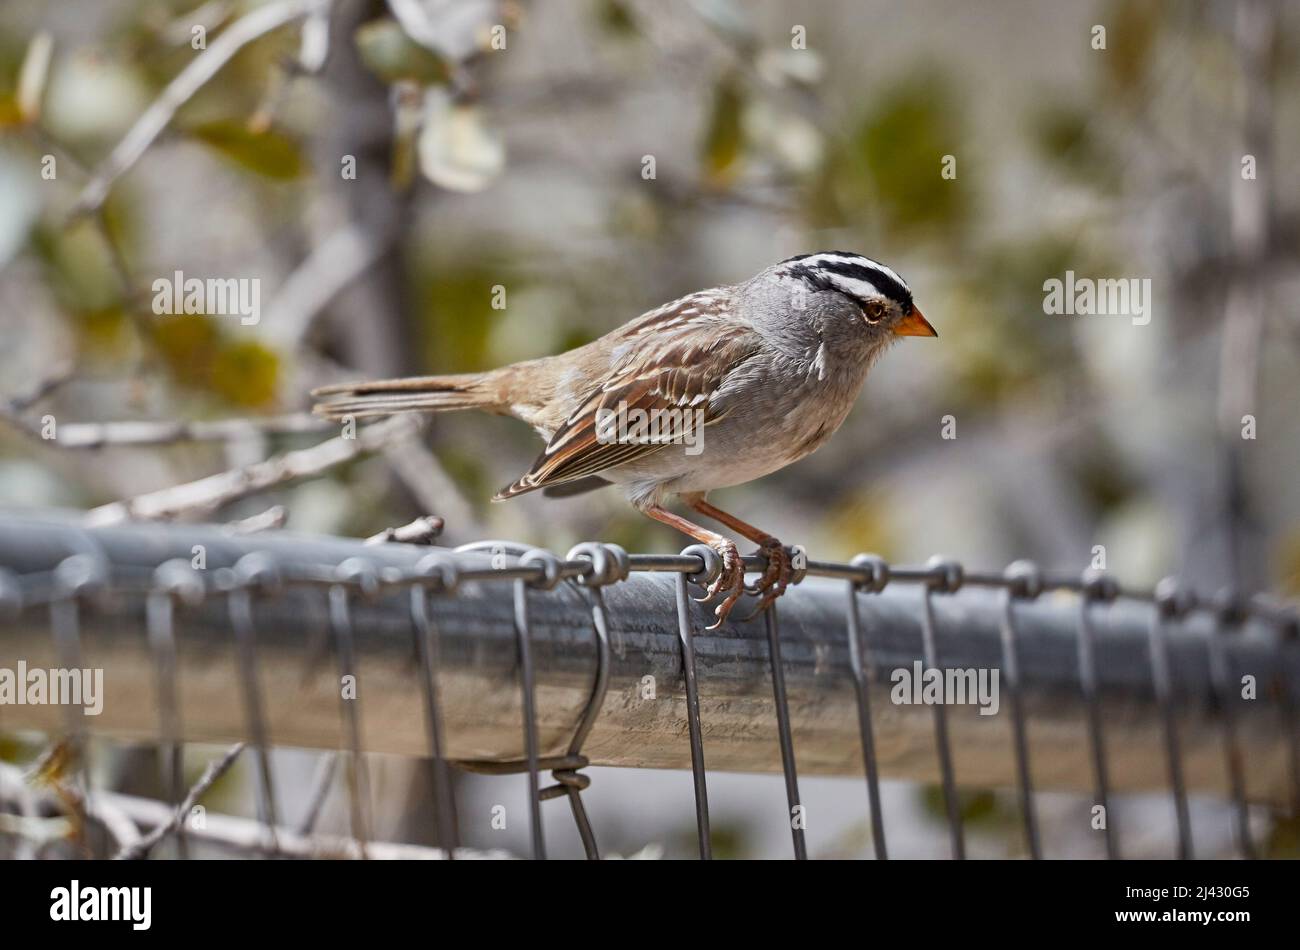 Wild Bird sitting on a fence with shallow depth of field Stock Photo